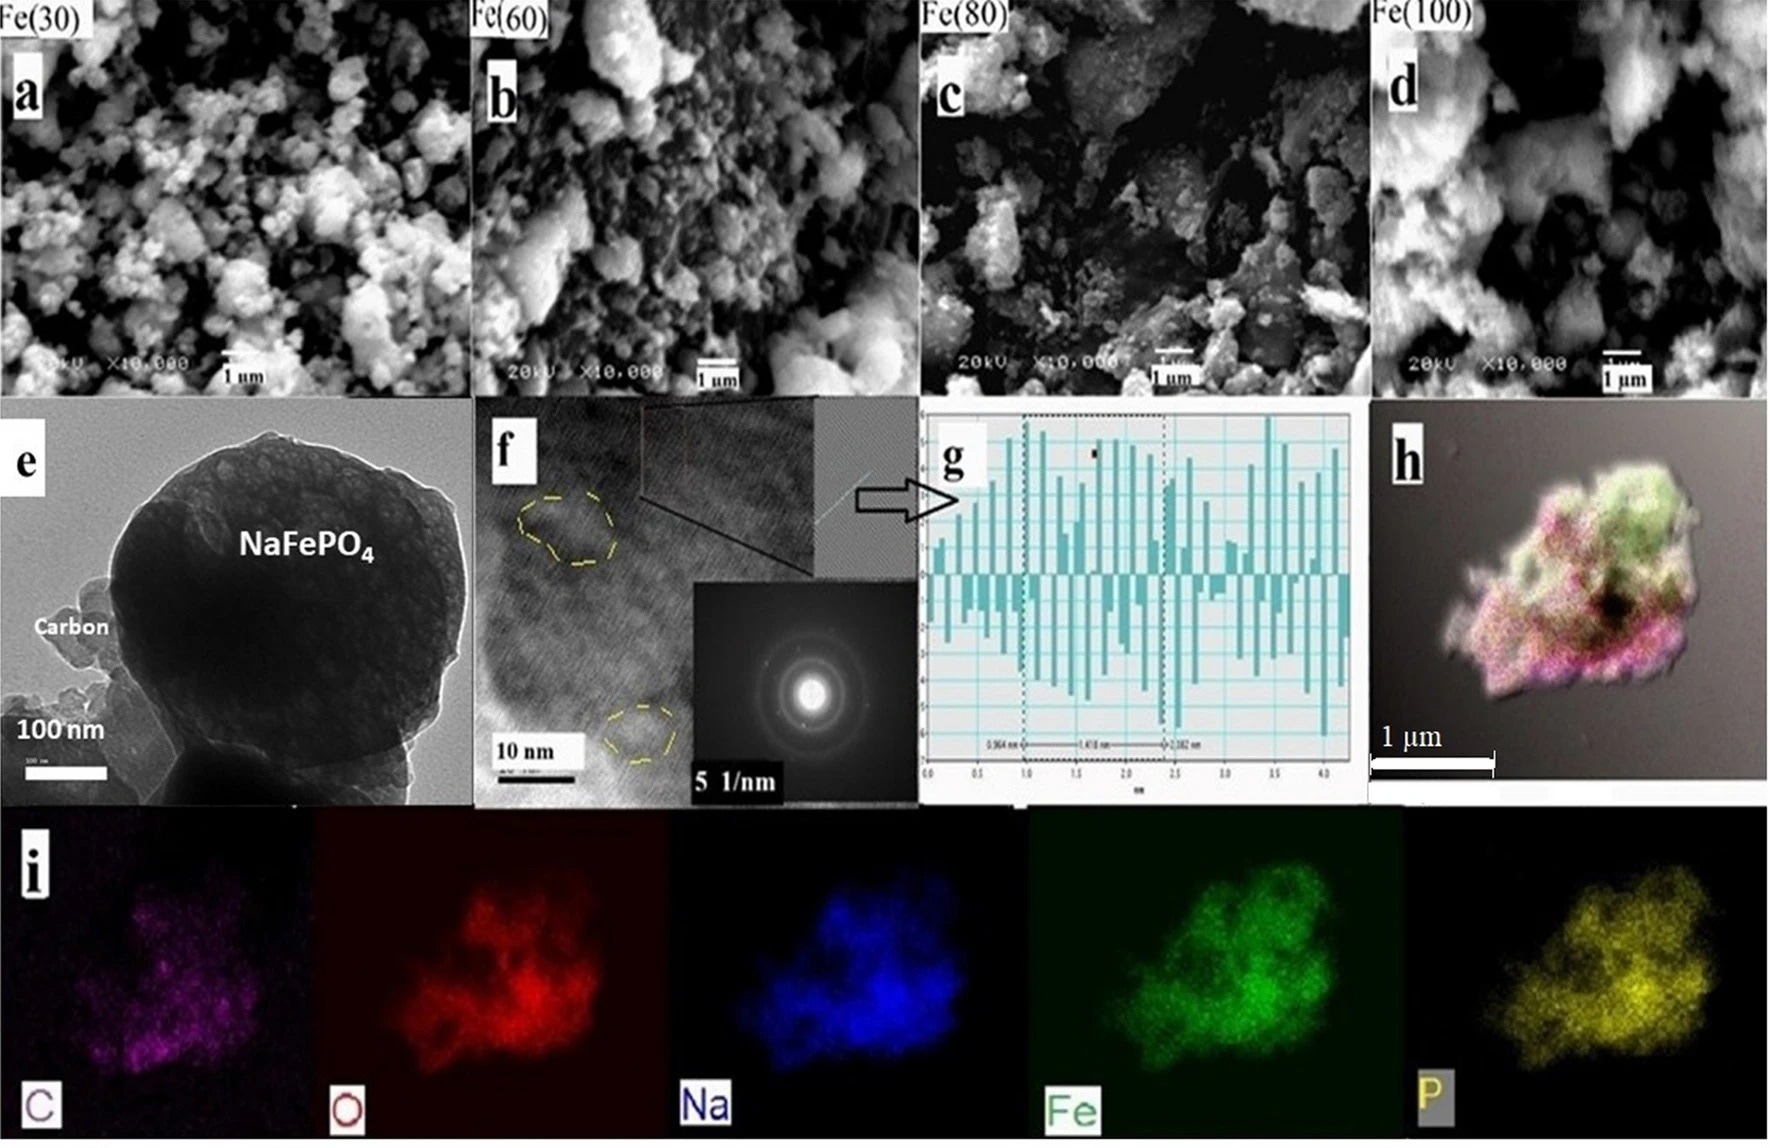 (a–d) SEM images at ×10,000 for Fe(30), Fe(60), Fe(80) and Fe(100) respectively. (e) Low magnification TEM image showing carbon compositing with NaFePO4 particles, (f) High magnification TEM image and SAED image for NaFePO4 spot, (g) FFT images and IFFT profile of Fe(60) for selected area along (240) plane and (h,i) Elemental mapping showing C, O, Na, Fe, and P distribution on the selected particle.